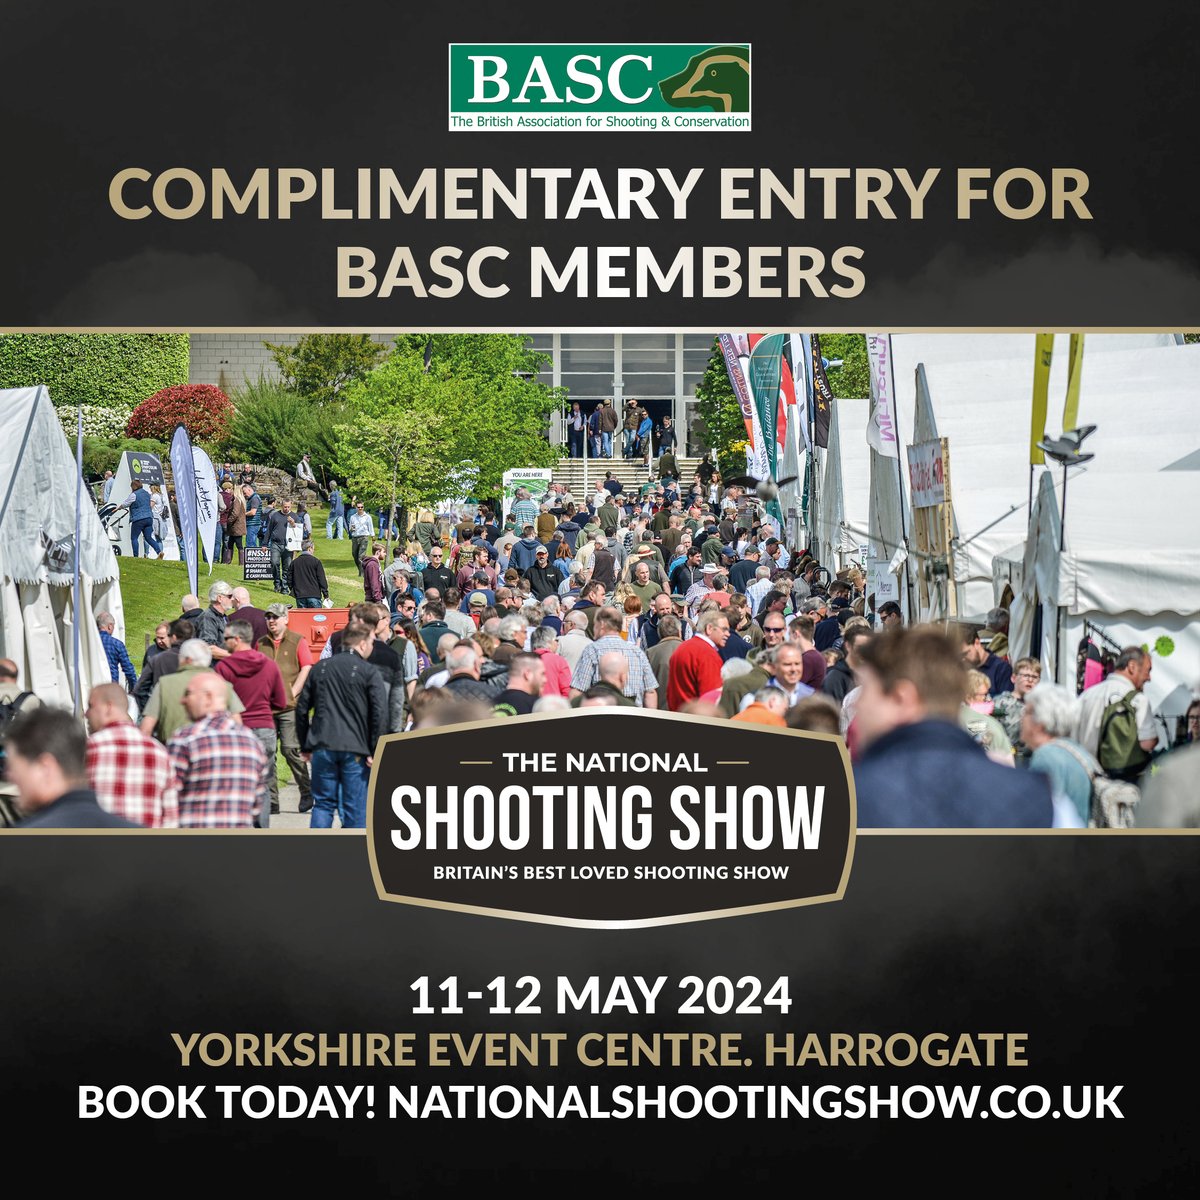 Are you filling your 2024 calendar? Don't forget to pencil in the @nationalshootingshow on the 11 and 12 May. BASC members can book their complimentary tickets using their membership number. orlo.uk/GET_BASC_TICKE… #NSS2024